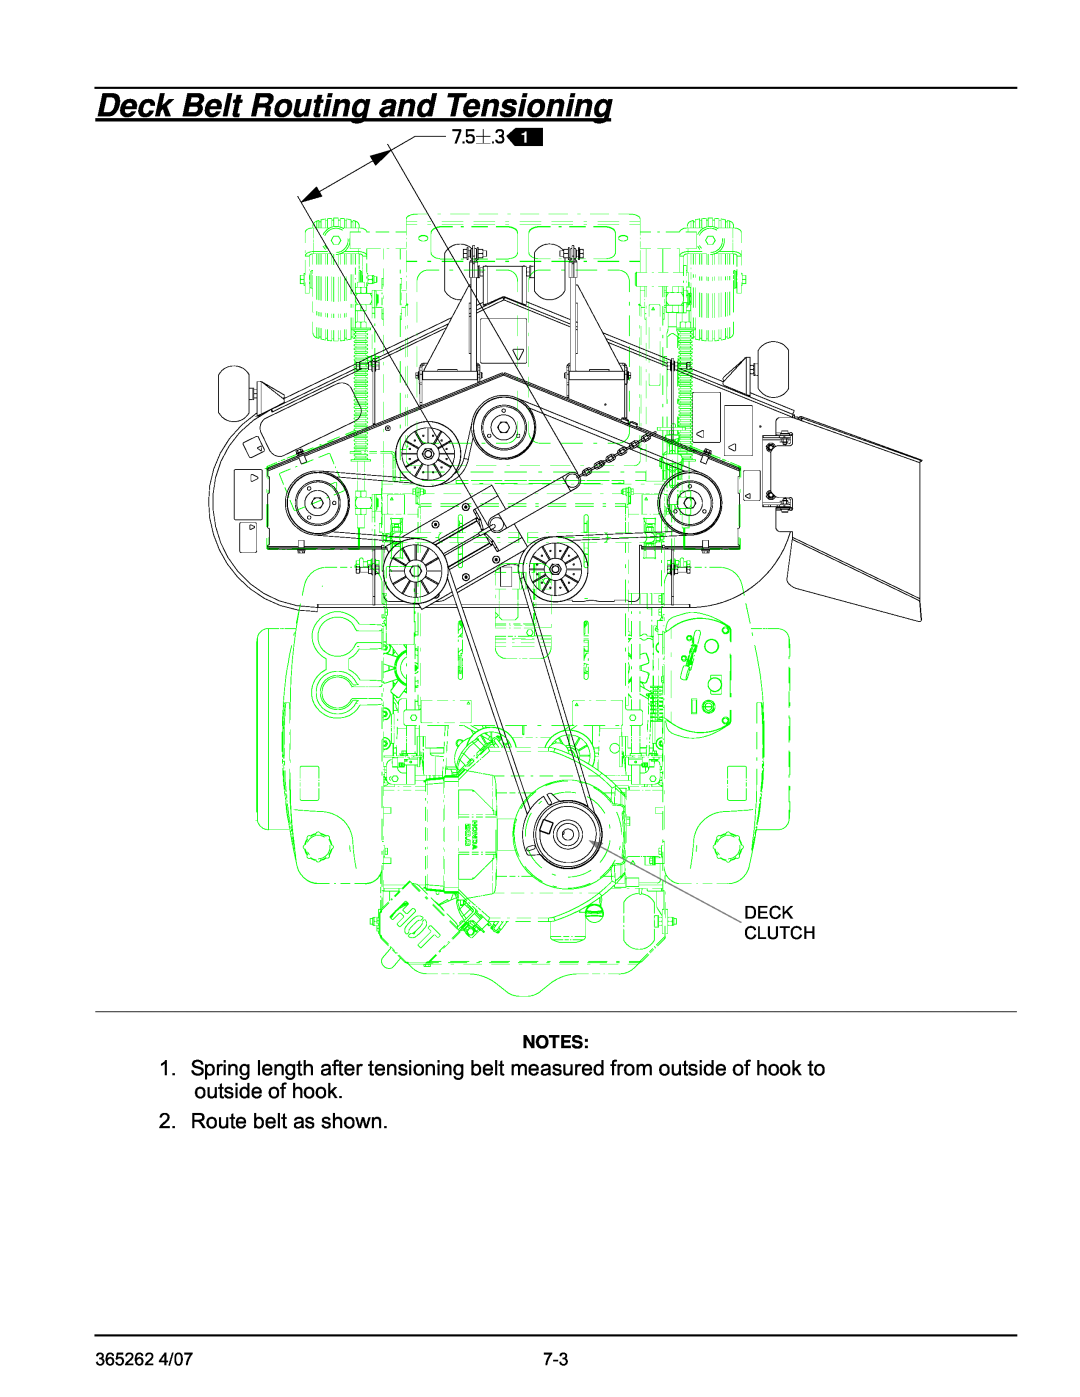 Hustler Turf Lawn Mower manual Deck Belt Routing and Tensioning, Route belt as shown 